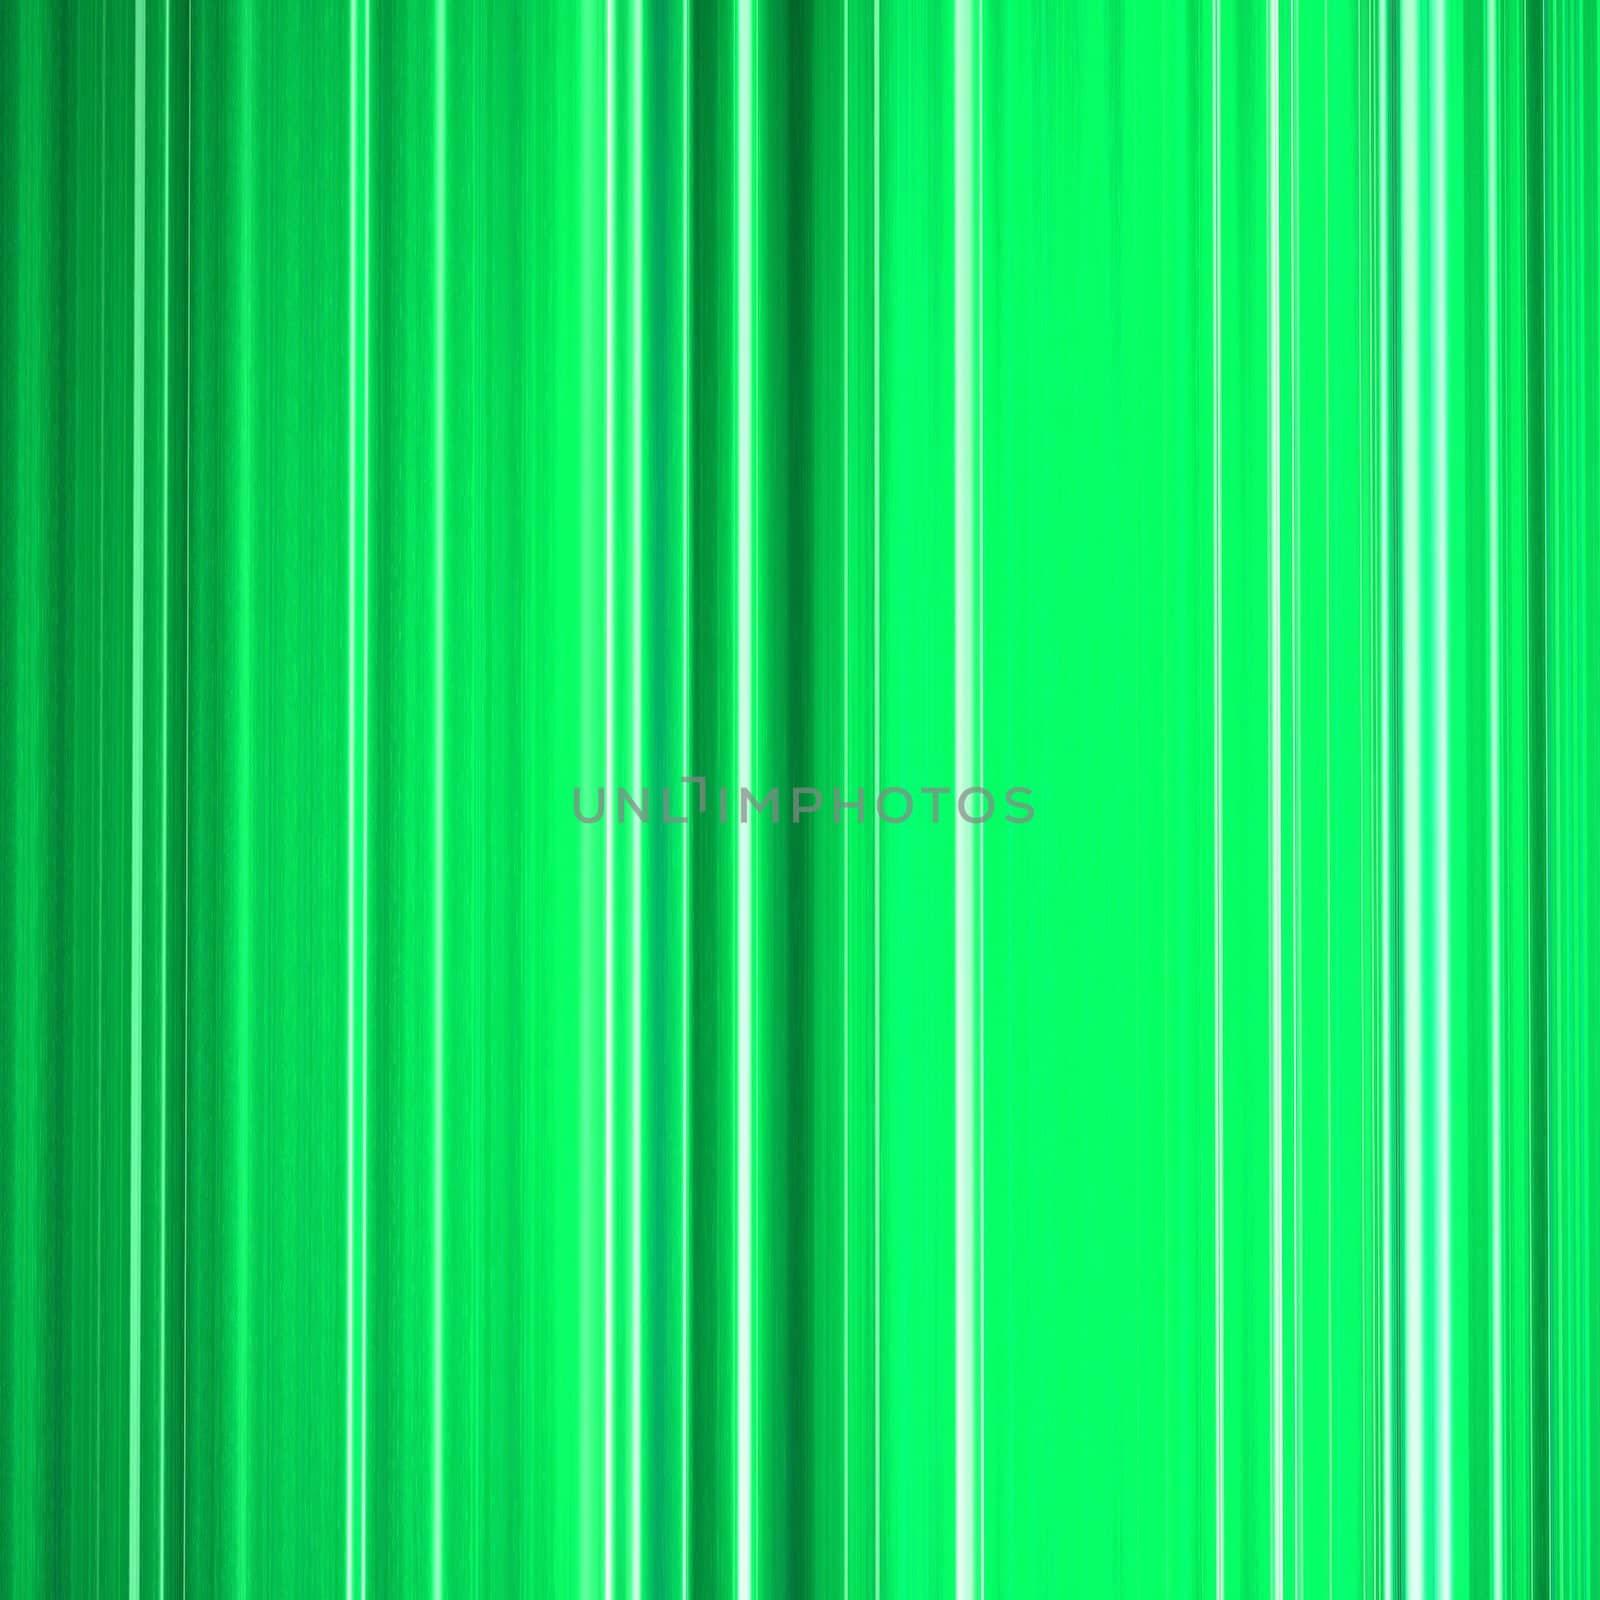 Green Vertical Lines by jasony00